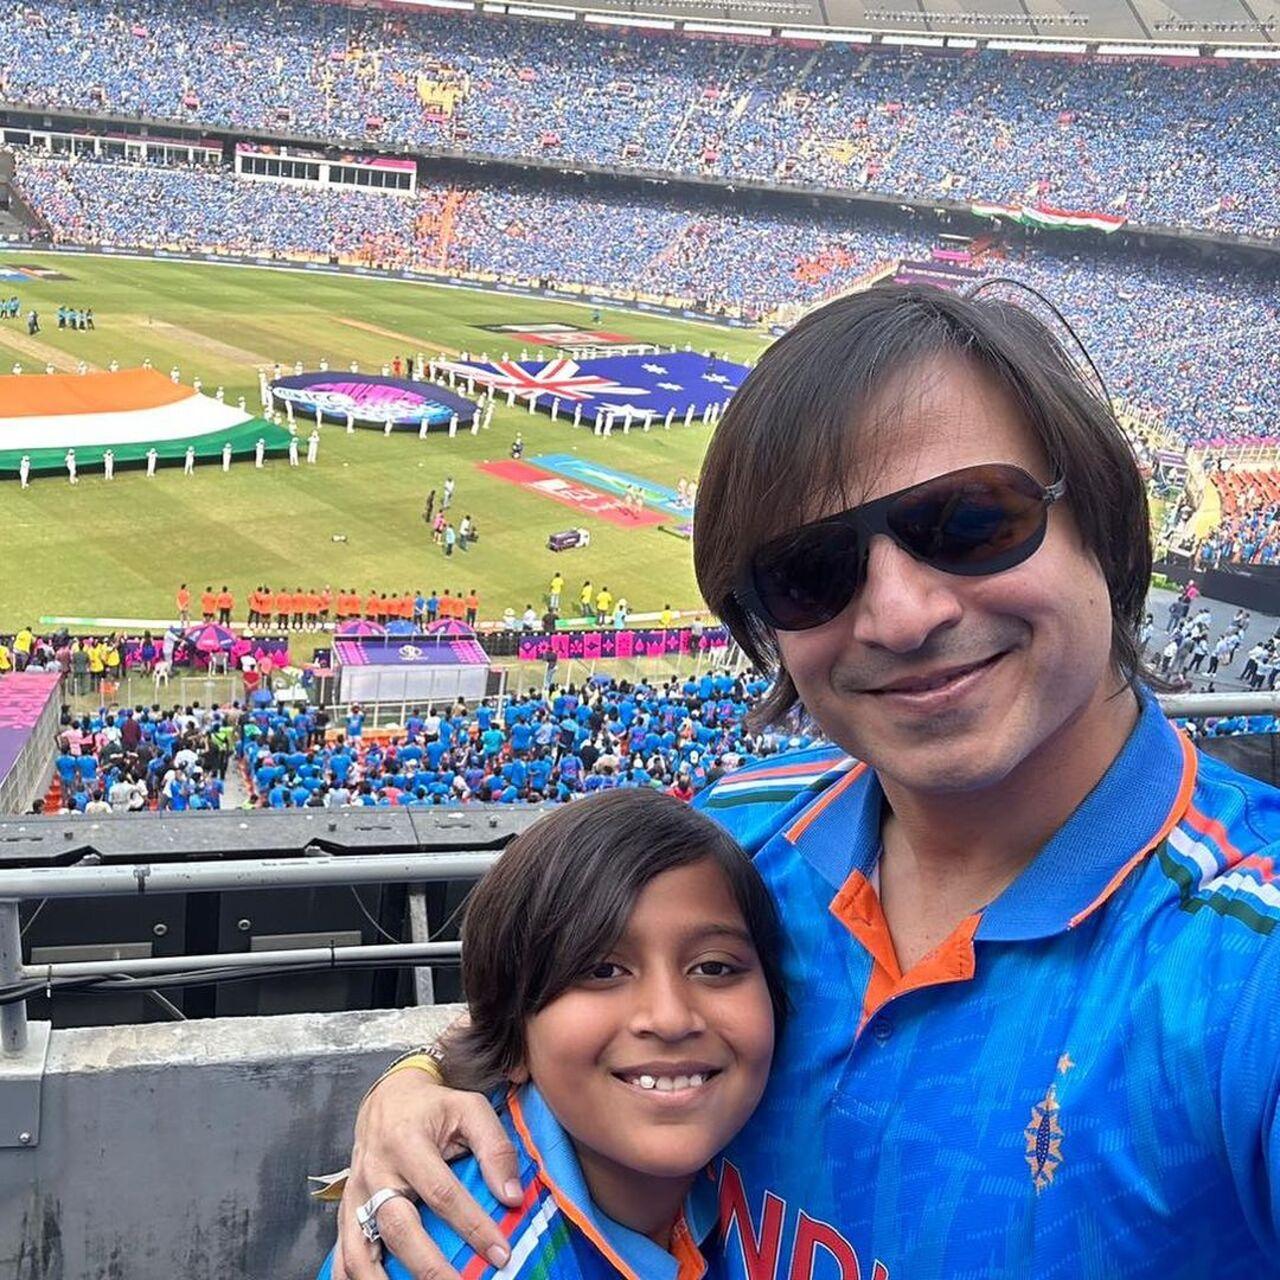 Vivek Oberoi also shared pictures from the stadium as he attended the game with his son Vivaan